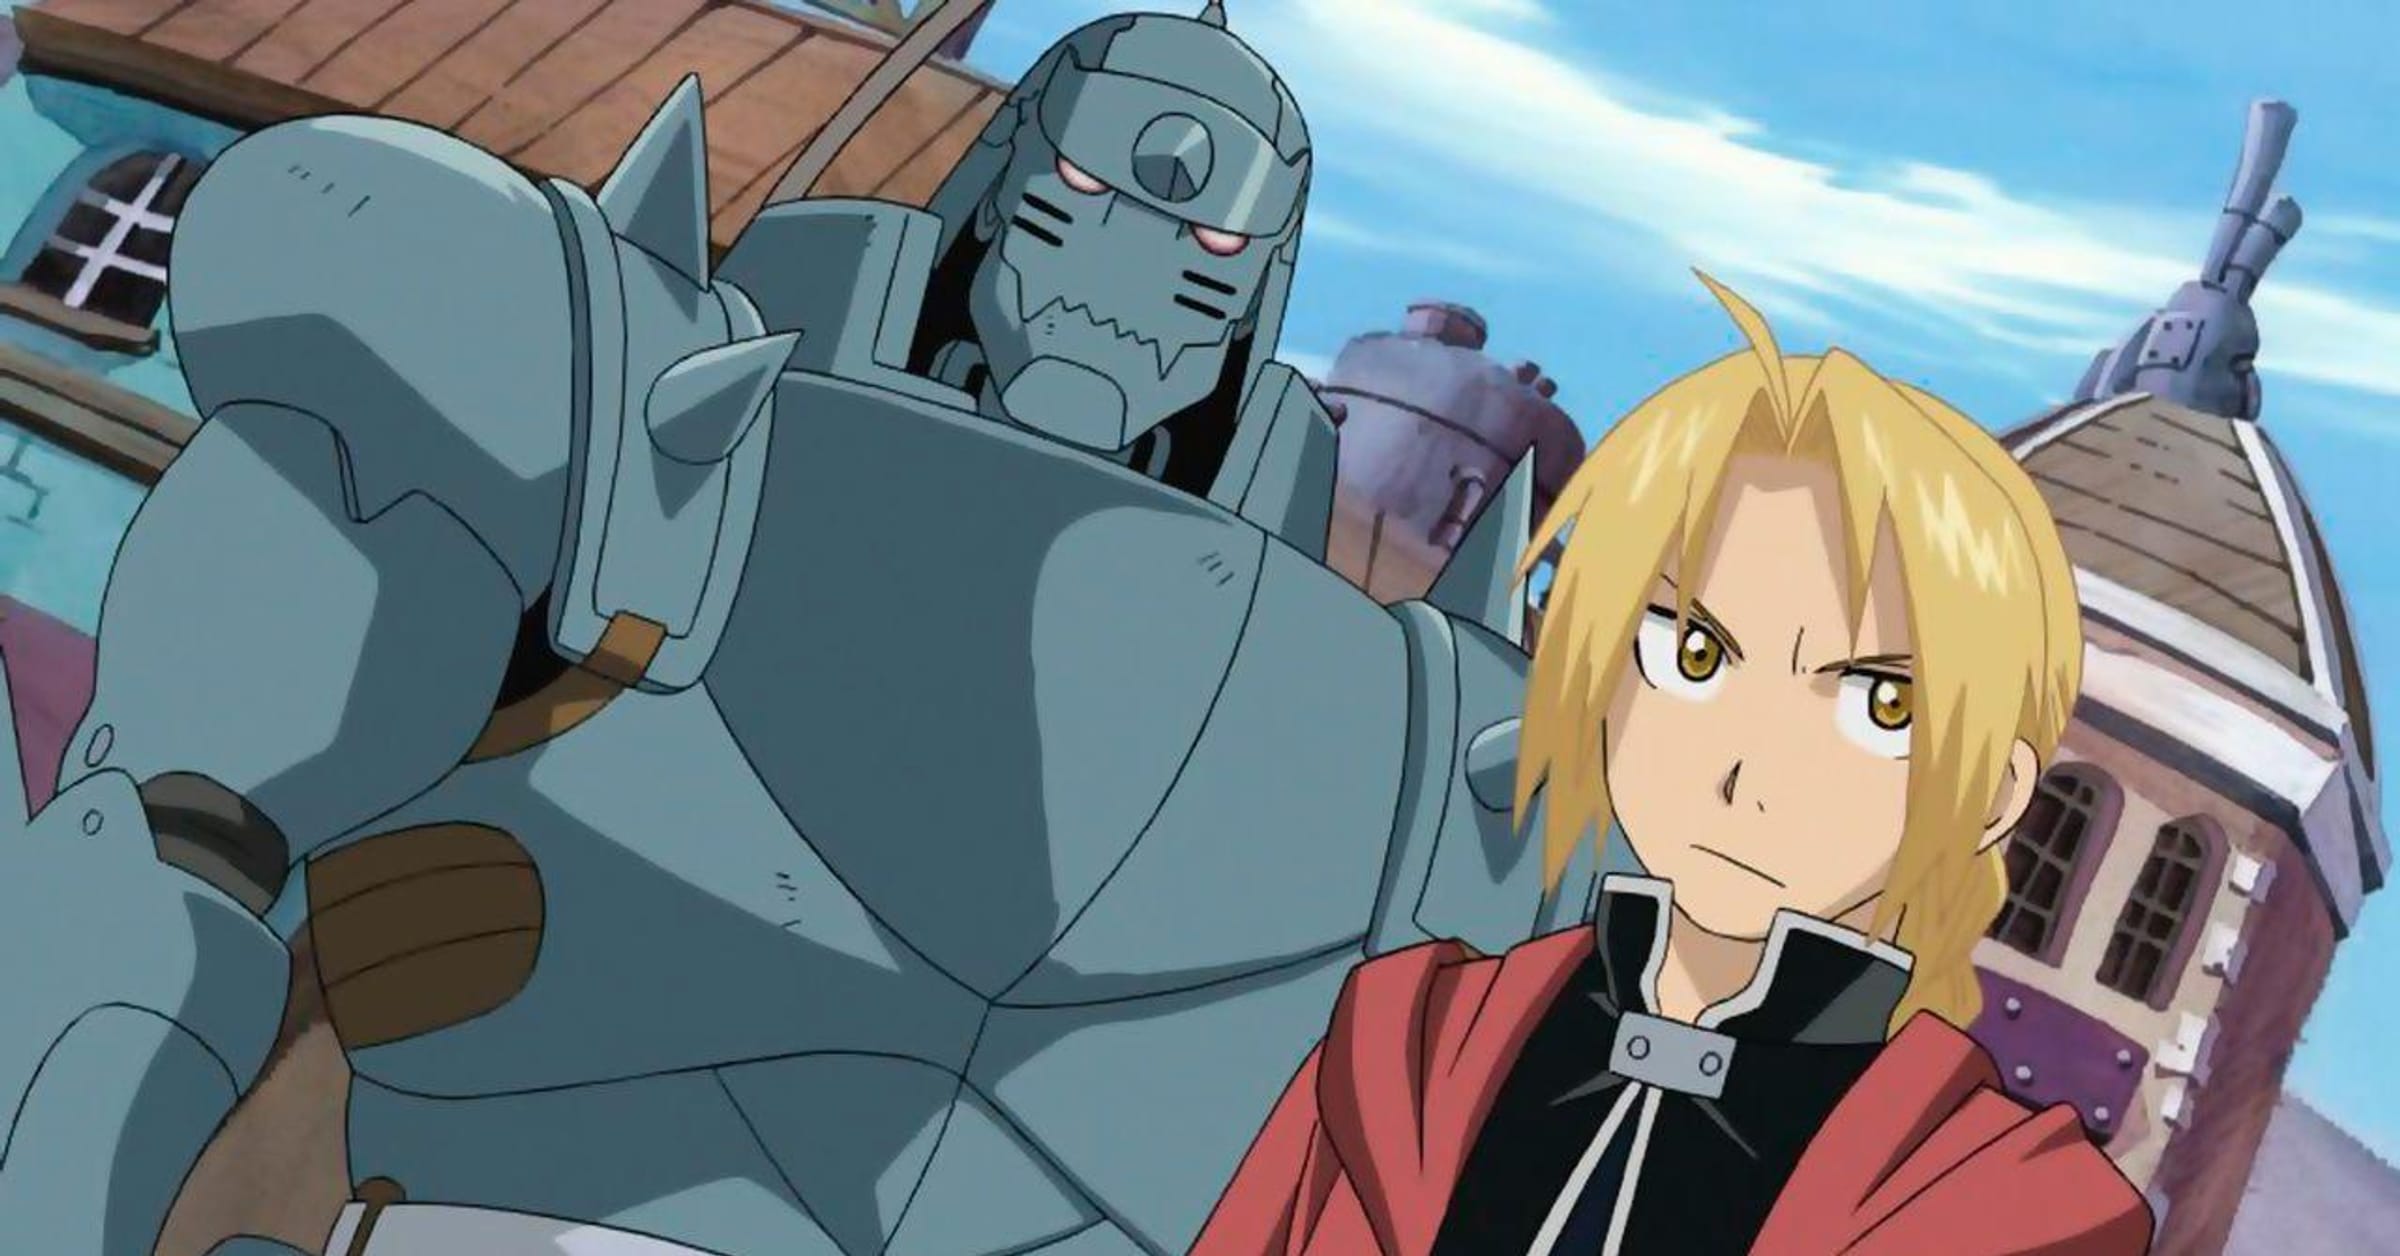 Who's the best couple? Write your opinion. [Fullmetal Alchemist